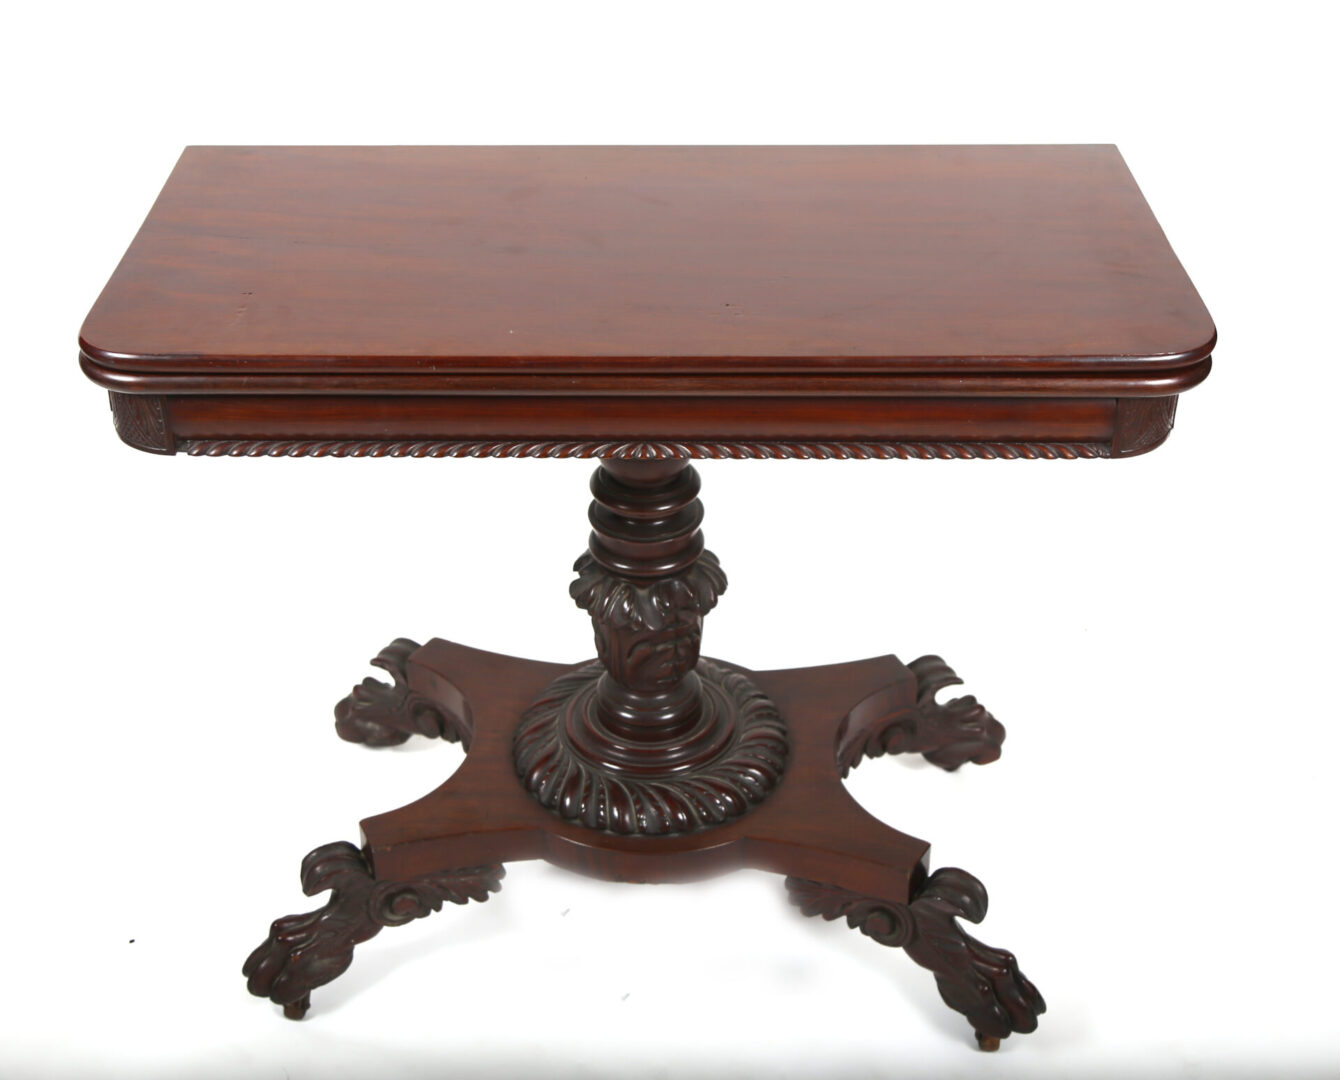 A table with a wooden top and a carved pedestal.